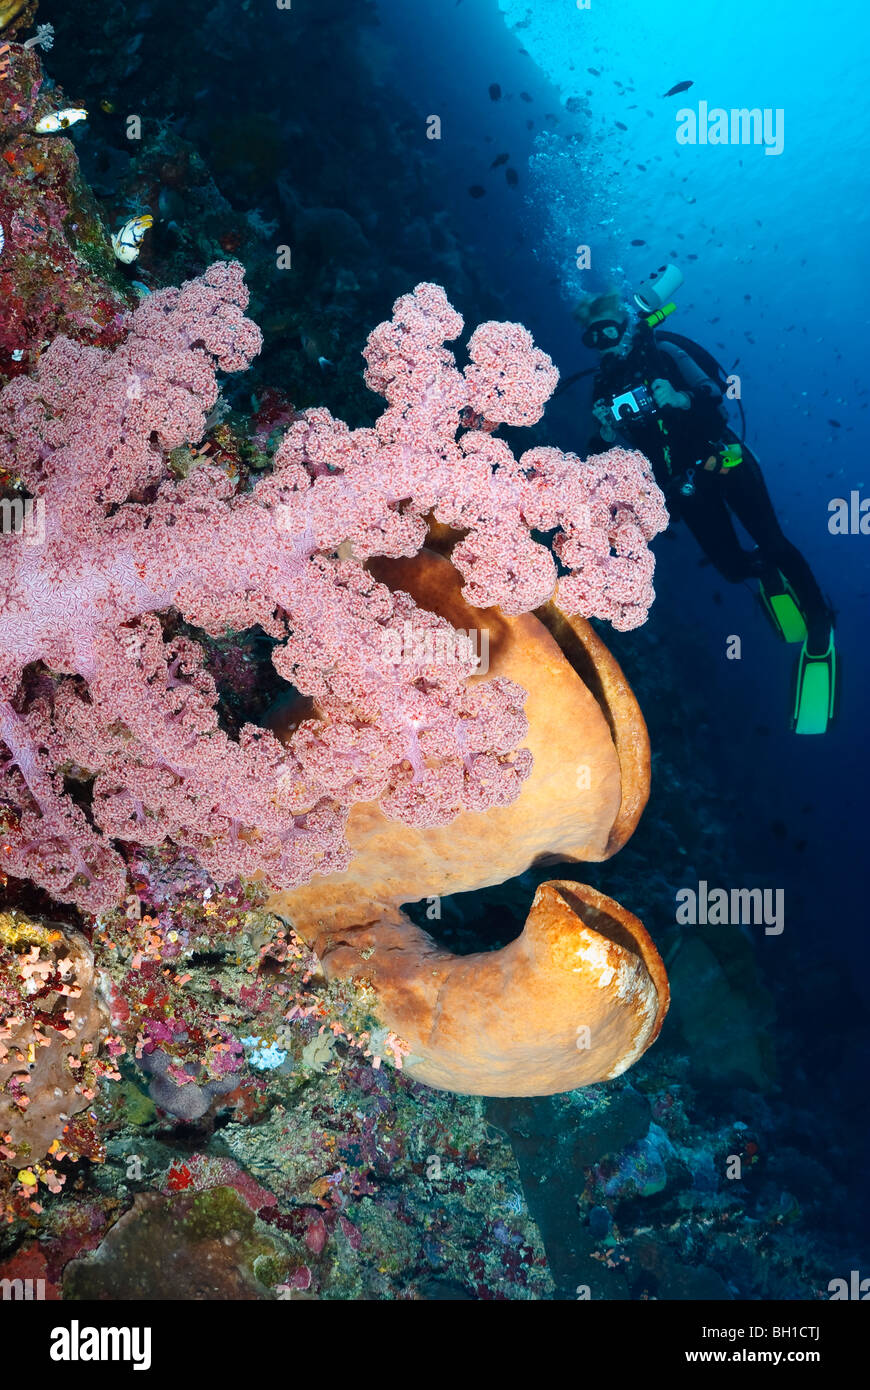 A female scuba diver photographs Cauliflower coral, Dendronephthya sp., Bunaken Marine Park, Sulawesi, Indonesia, Pacific Stock Photo